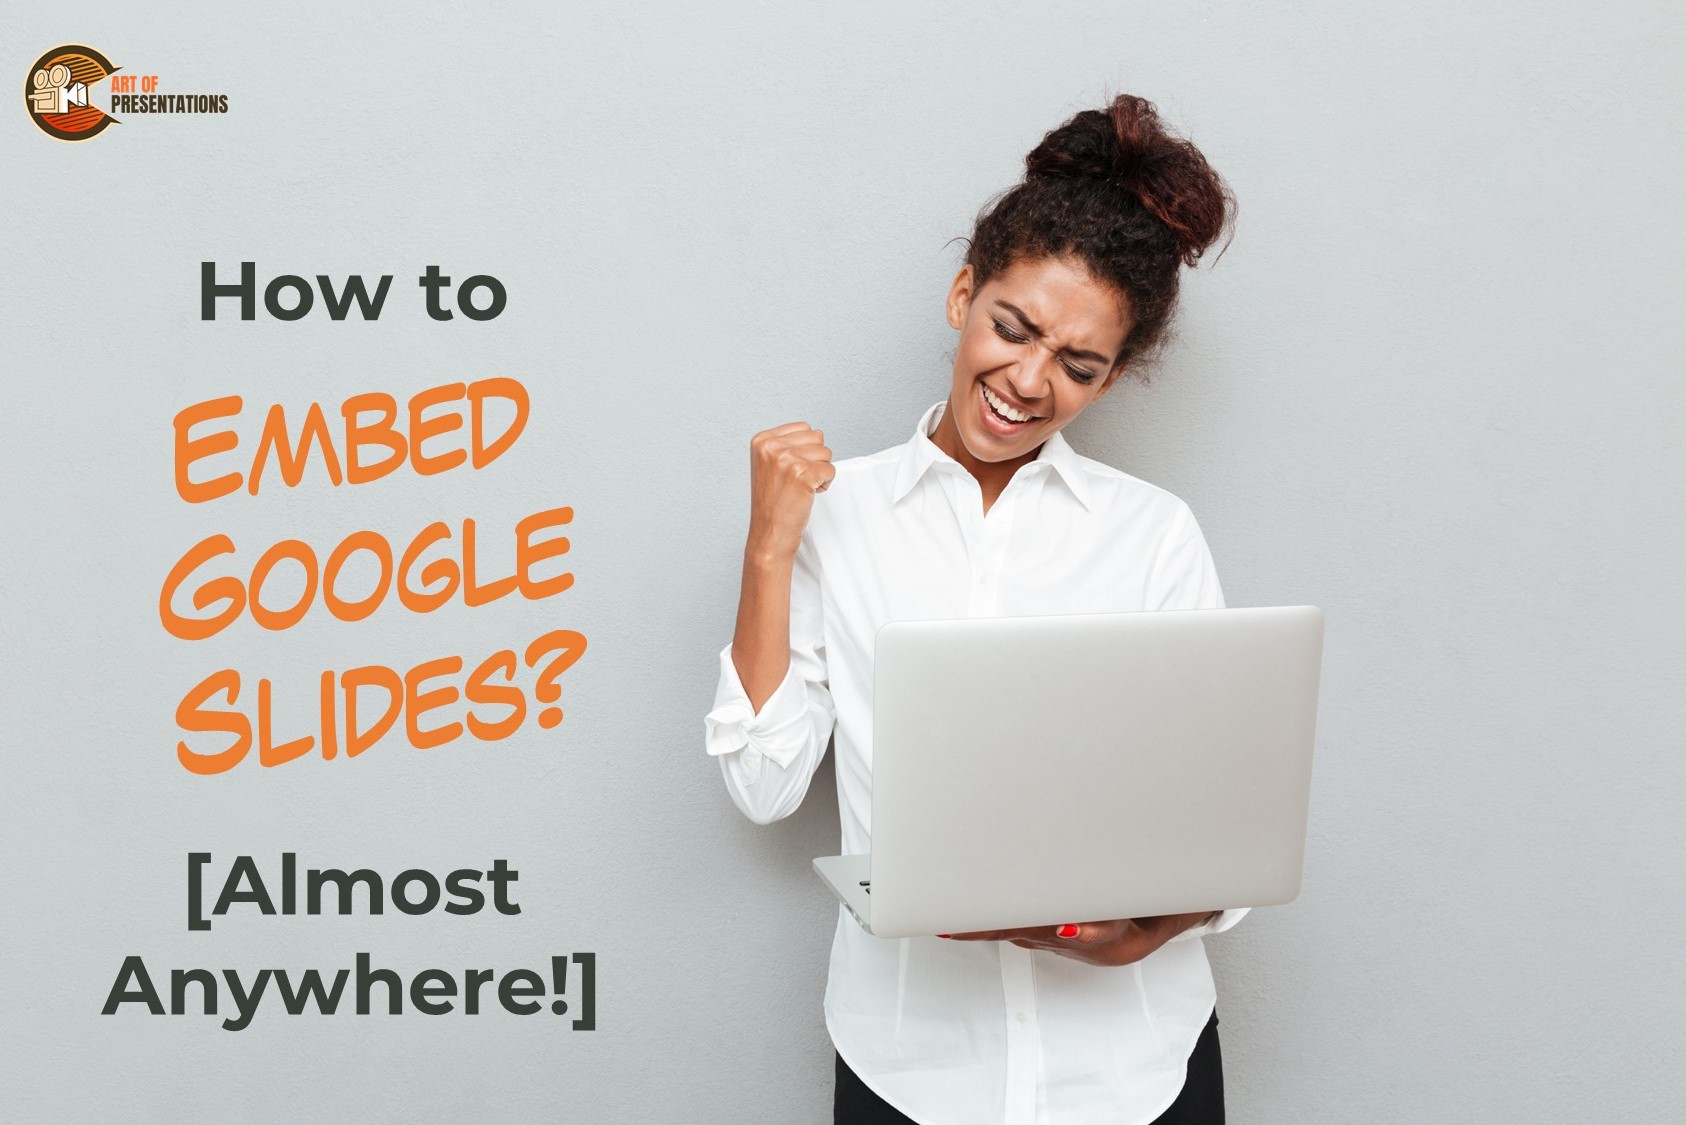 How to Embed Google Slides? [Almost Anywhere!]